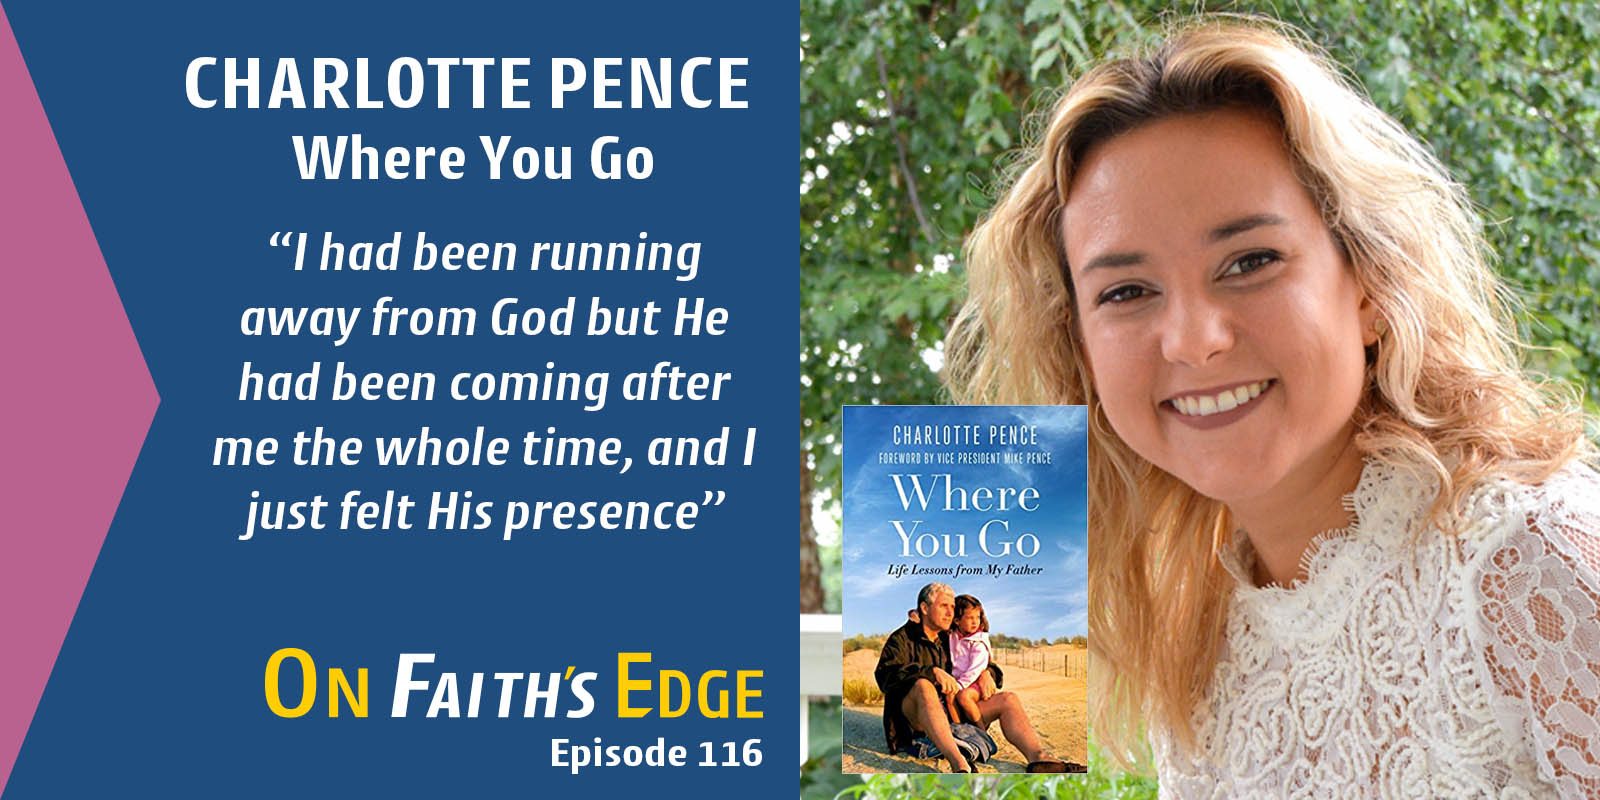 Charlotte Pence- Life Lessons from My Father, Vice President – Mike Pence